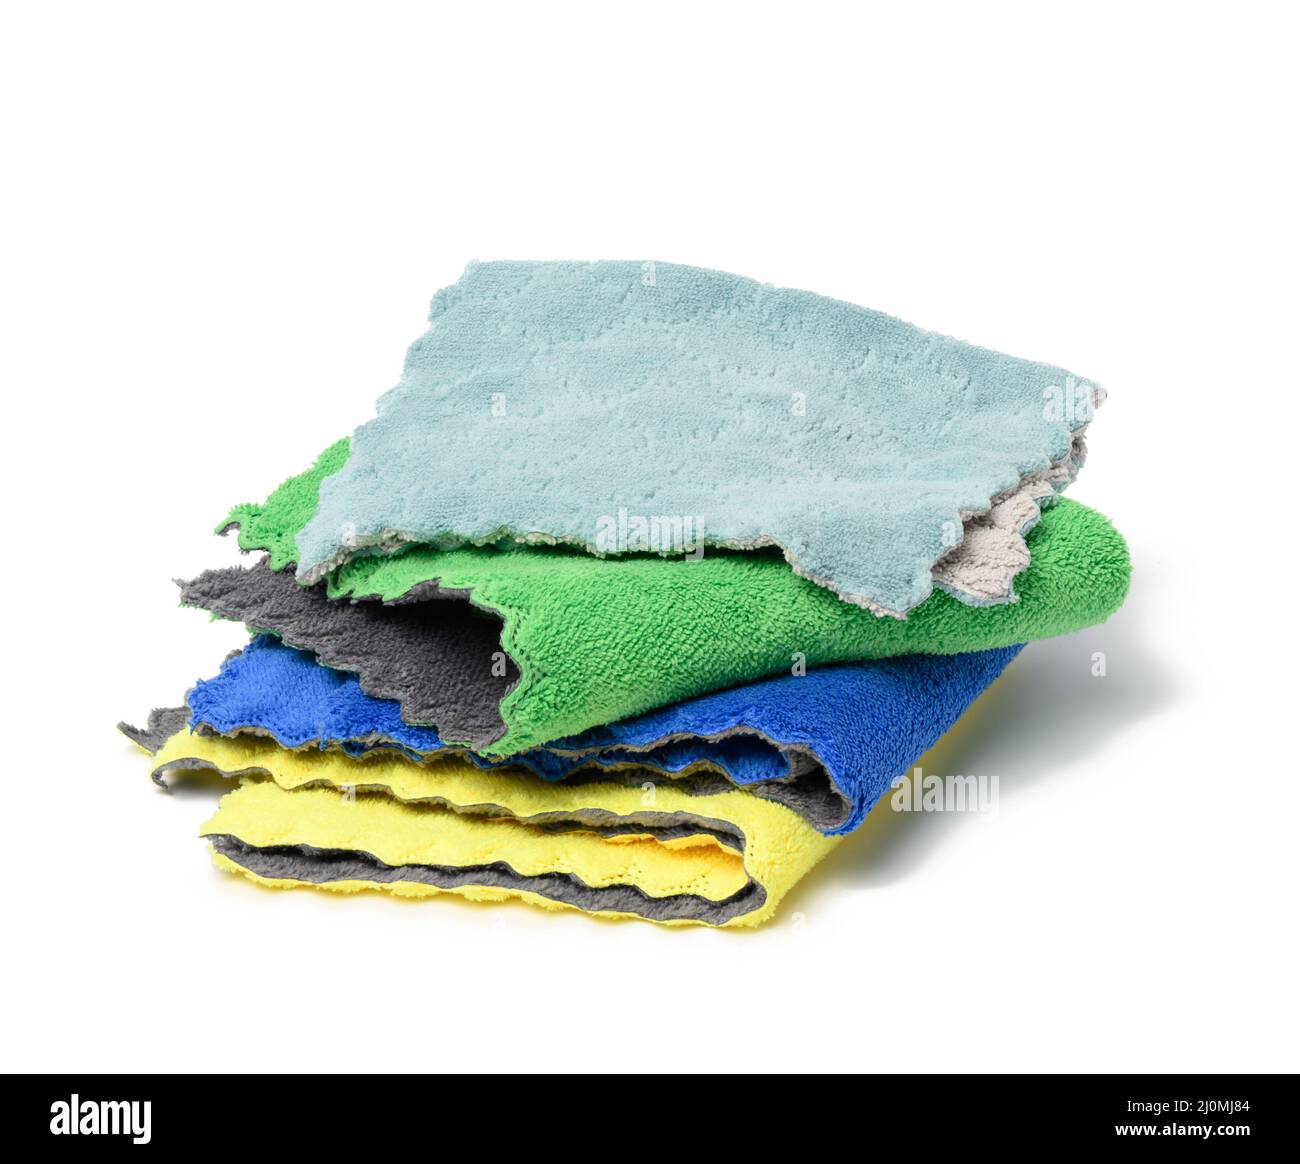 https://c8.alamy.com/comp/2J0MJ84/stack-of-textile-multicolored-rags-for-cleaning-on-a-white-background-2J0MJ84.jpg